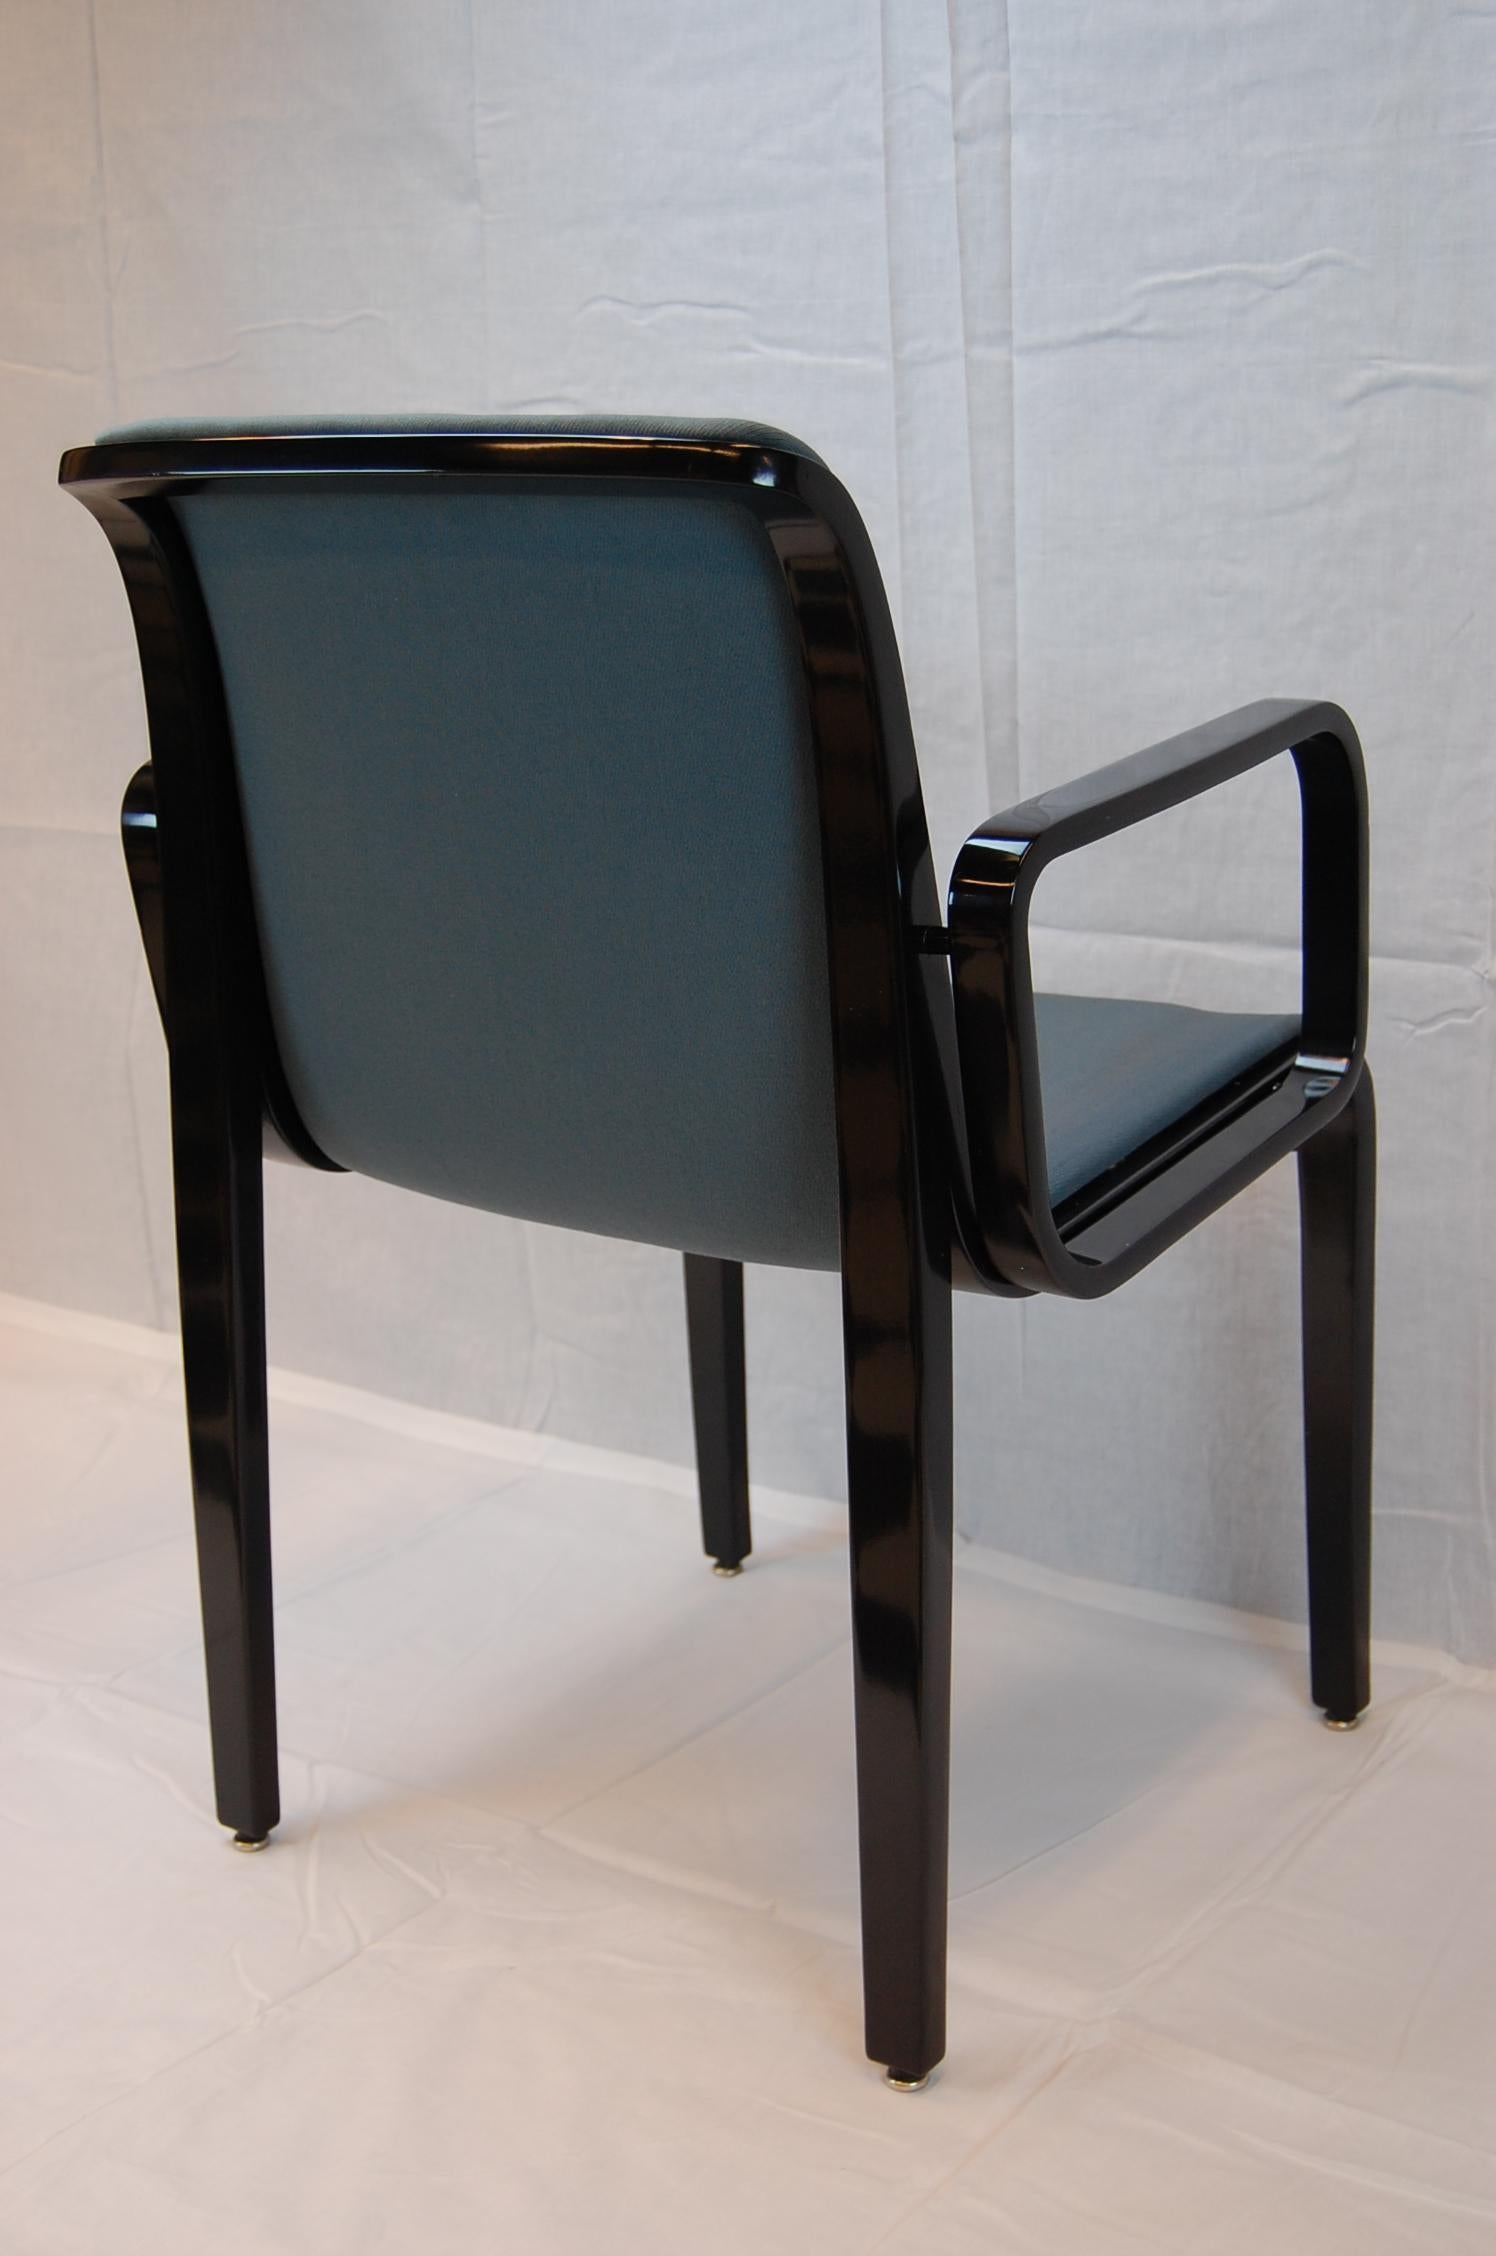 Bill Stephens Black Lacquered Armchair for Knoll Furniture, Mid-1990s In Excellent Condition For Sale In Pittsburgh, PA